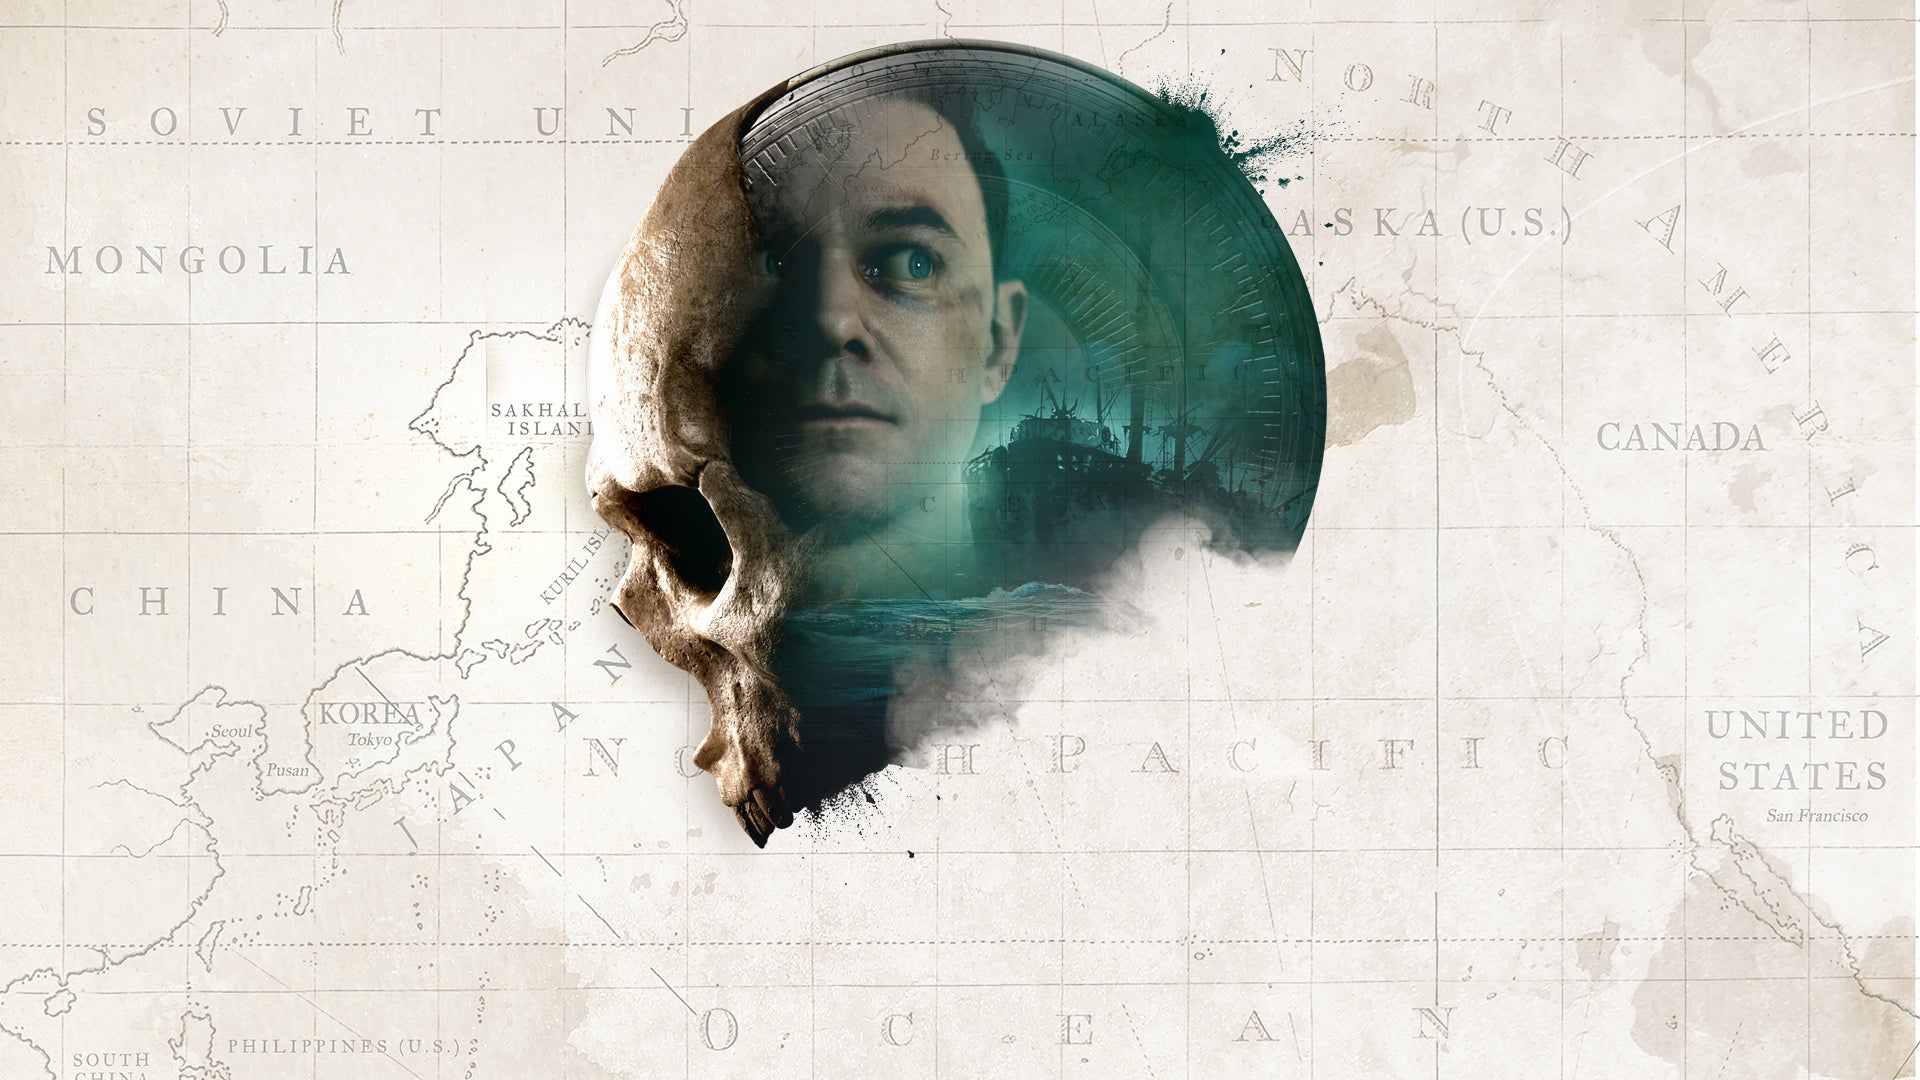 Artwork for the Man of Medan instalment in The Dark Pictures Anthology; a map is shown with a skull over it, and Conrad's face can be seen inside of the skull.